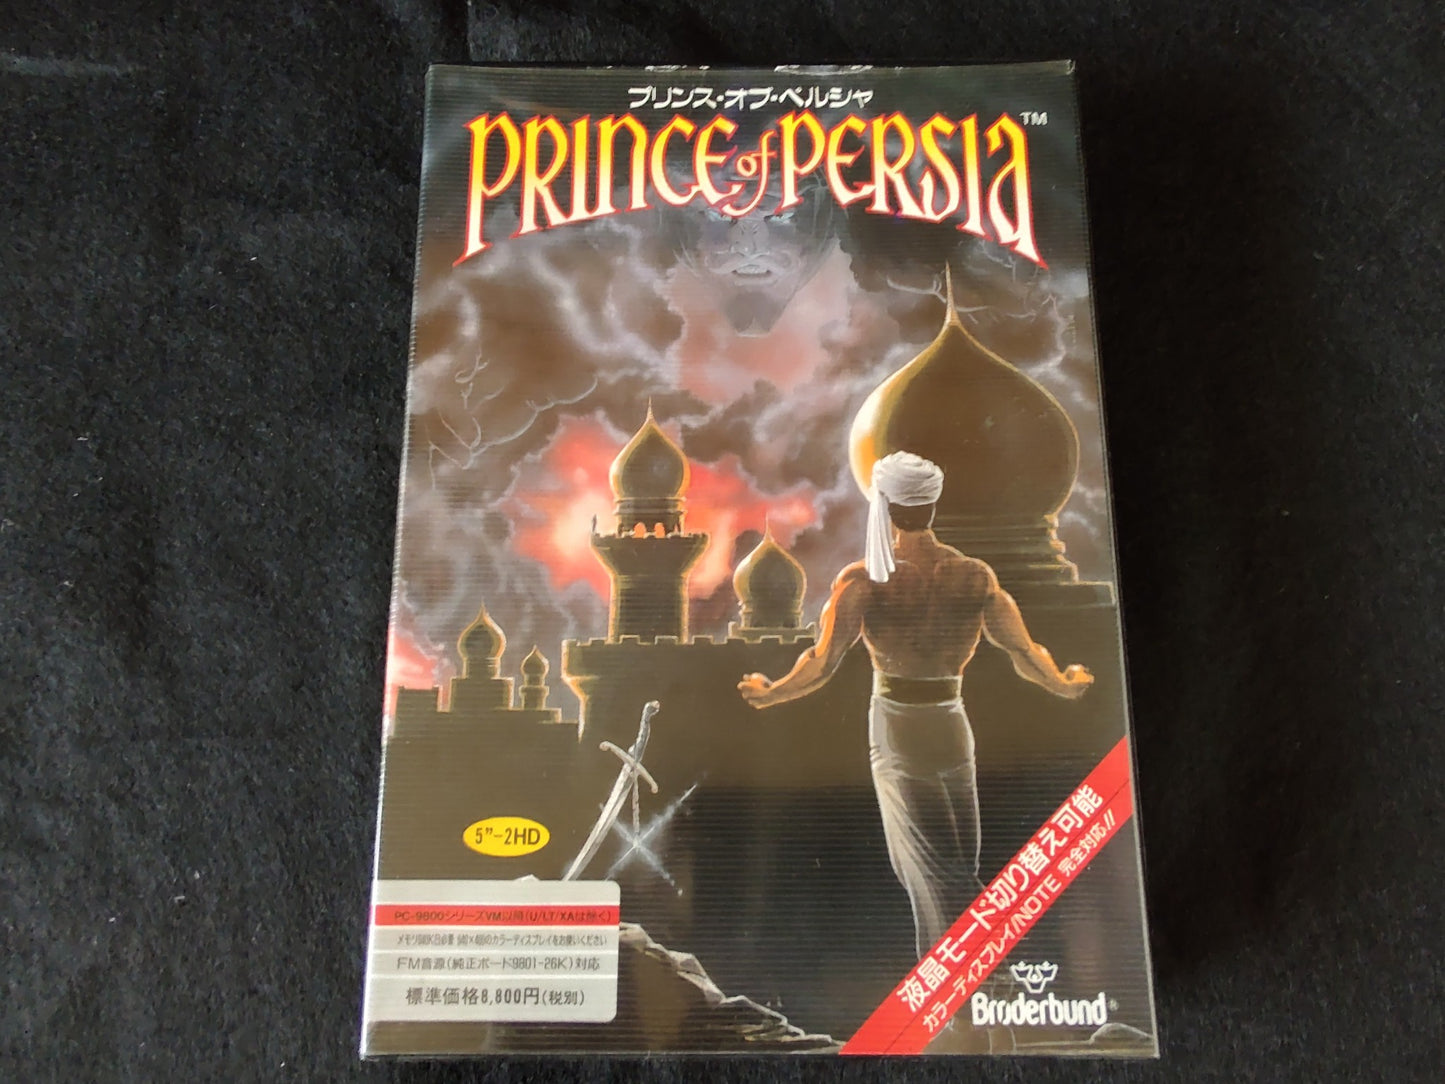 PC-9801 PC98 Prince of Persia Game FDDs w/Manual and Box set, Working-f0809-